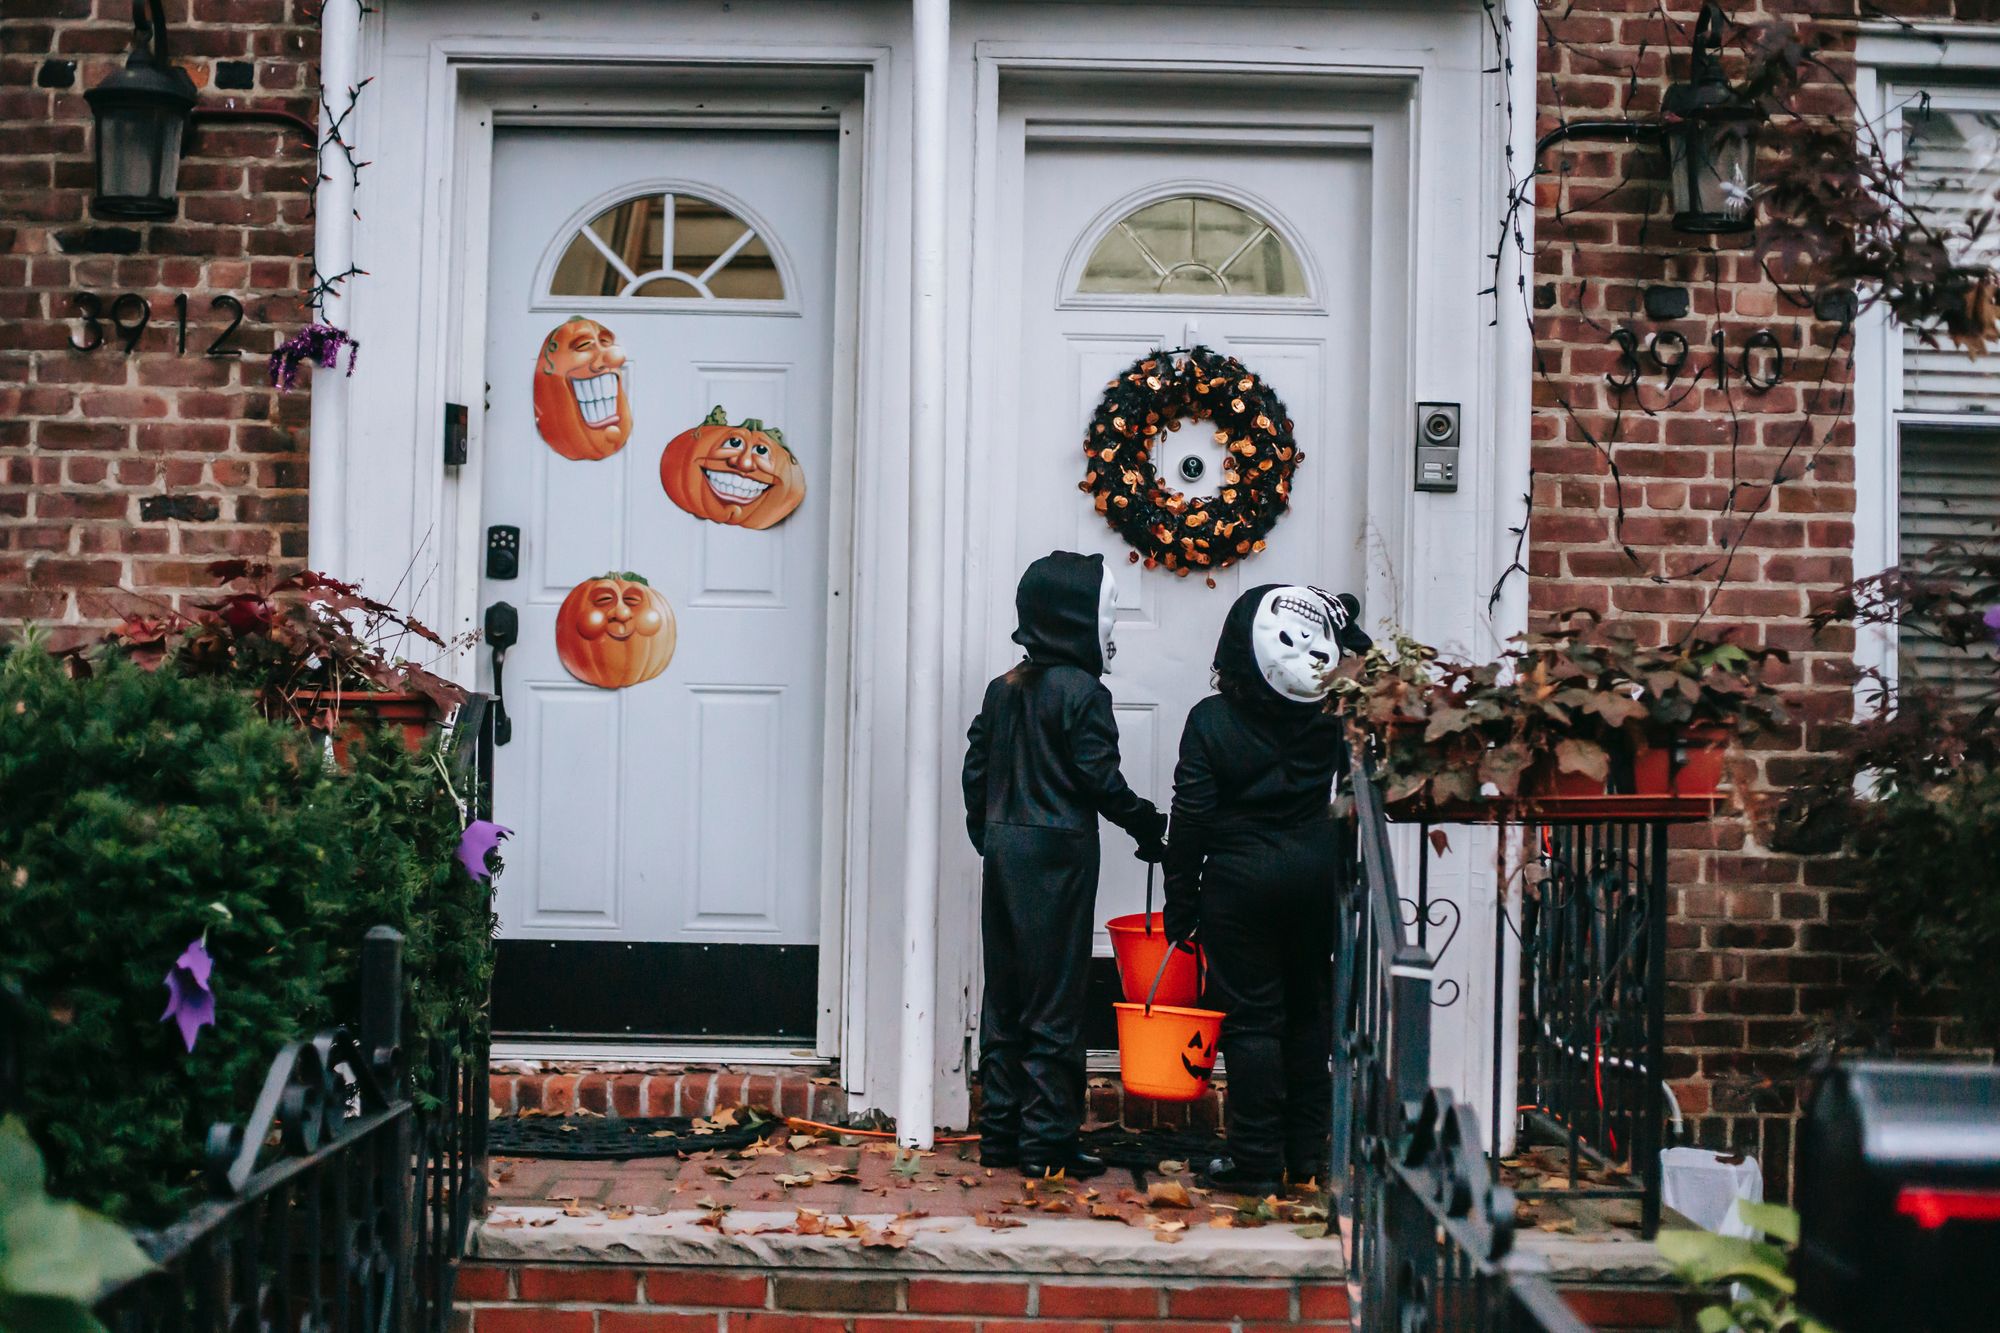 Two trick-or-treaters knocking on a neighbor's door